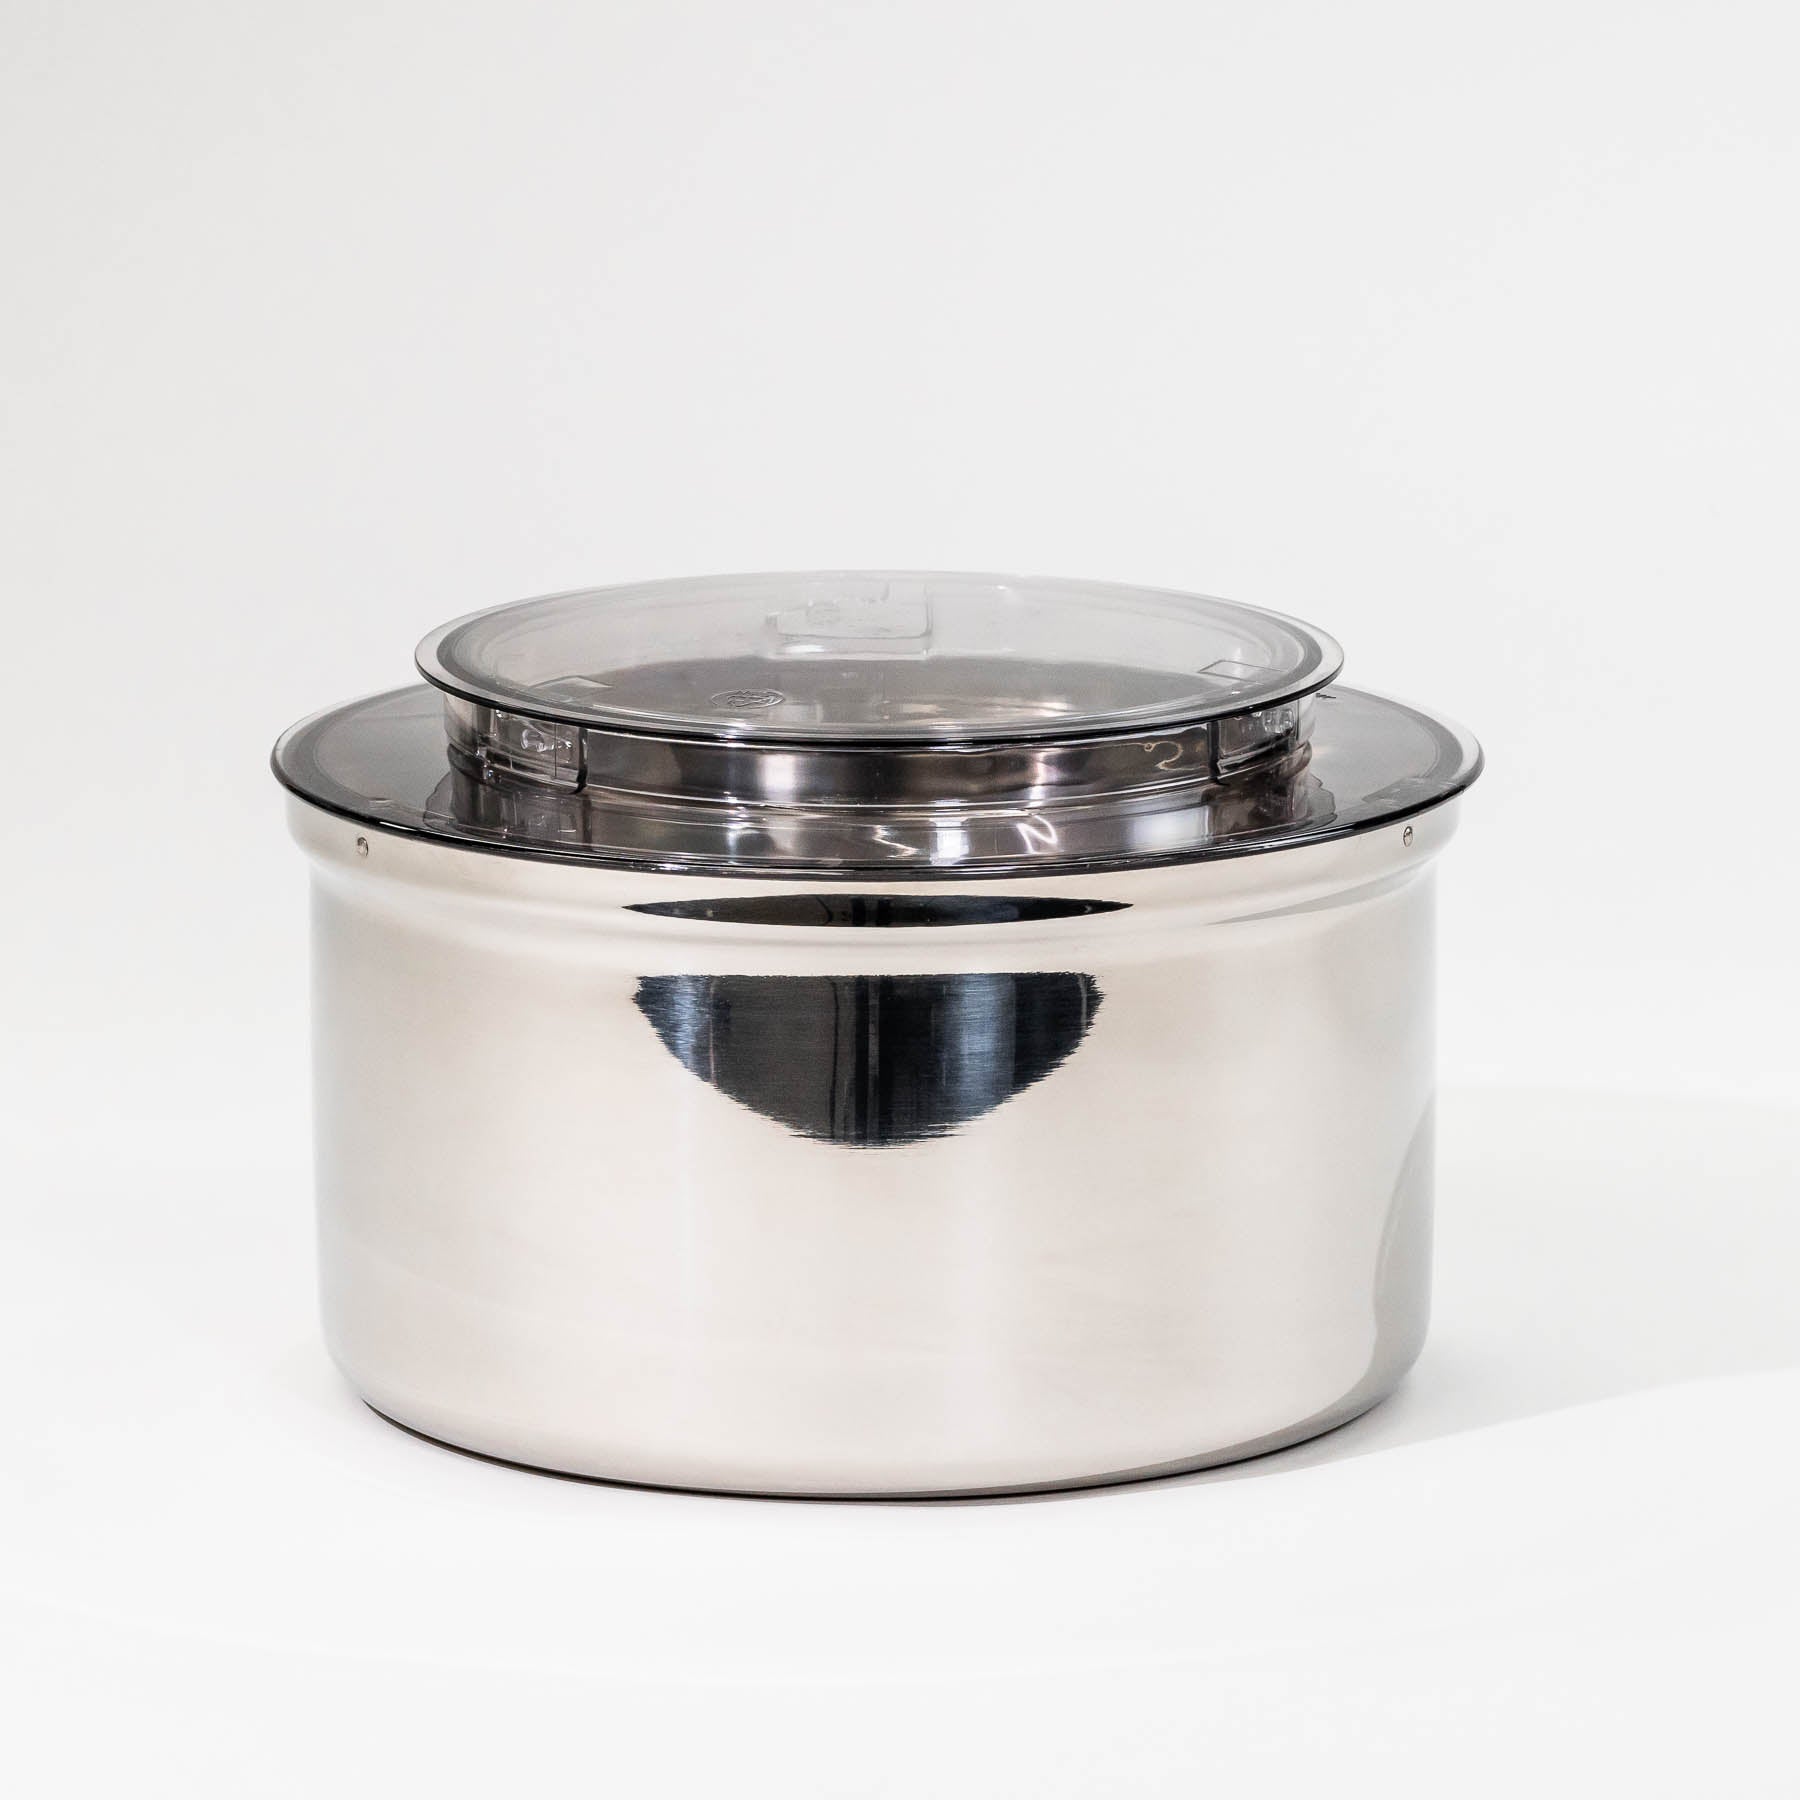 Refurbished Bottom Drive Stainless Steel Bowl